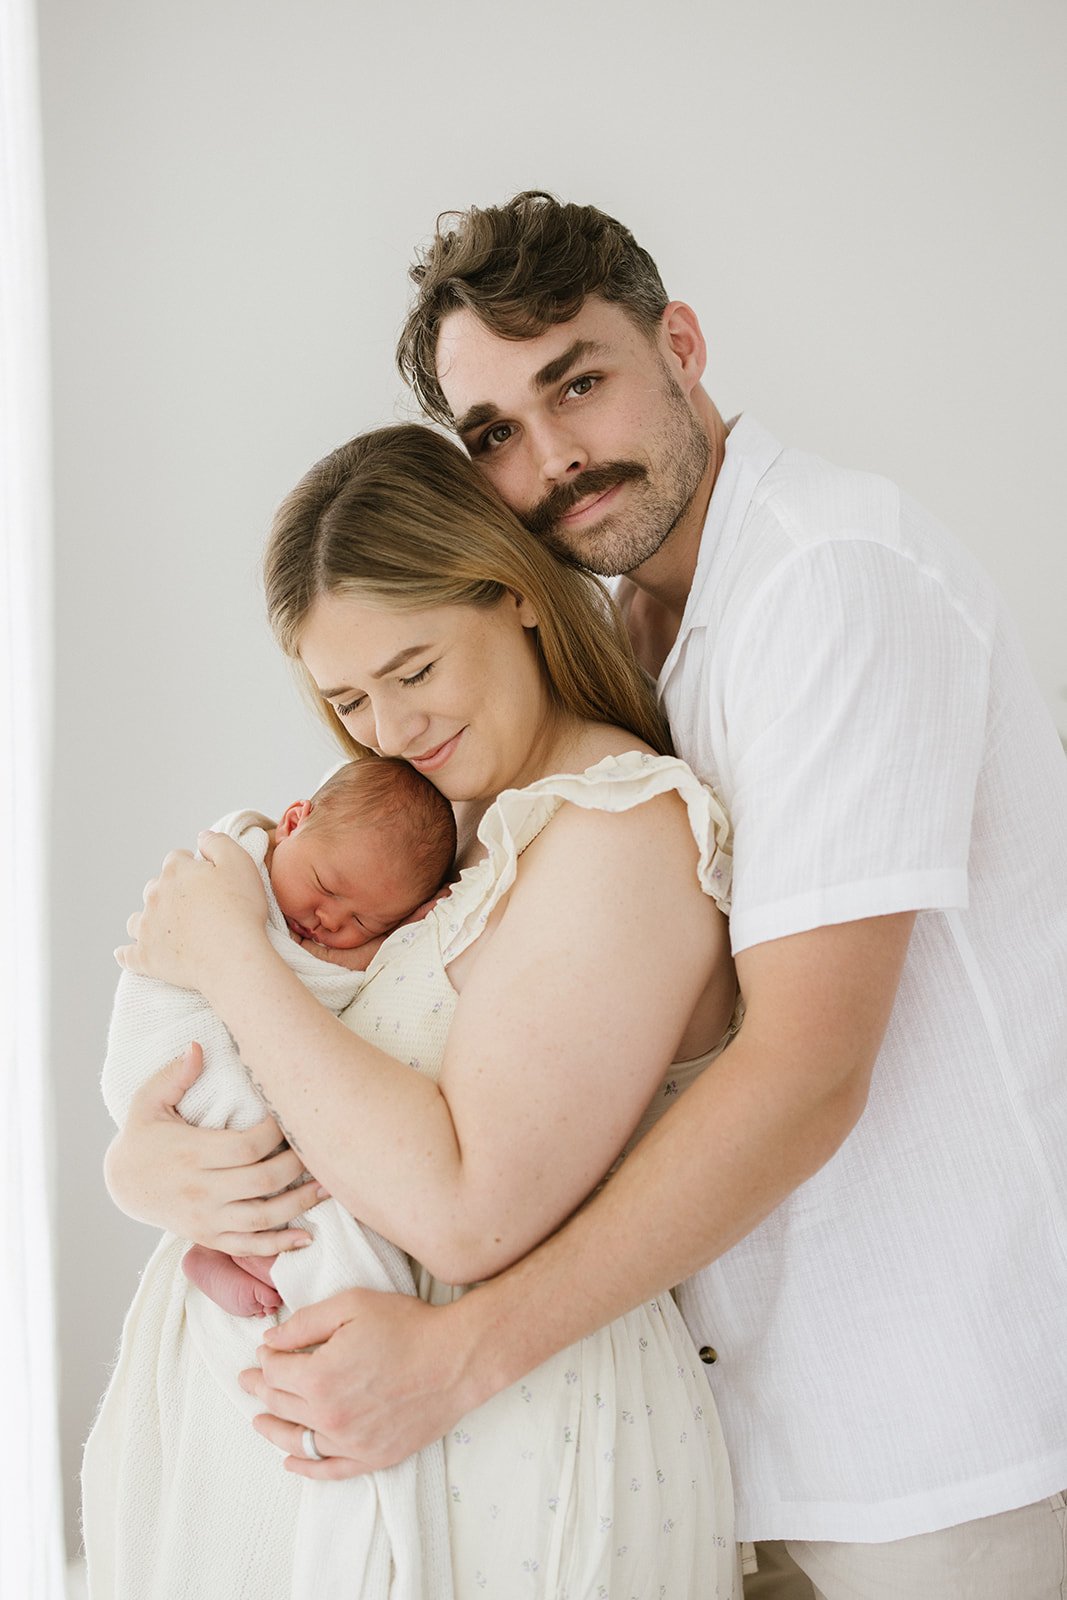  A dad cuddles into his wife who is holding their newborn baby.  